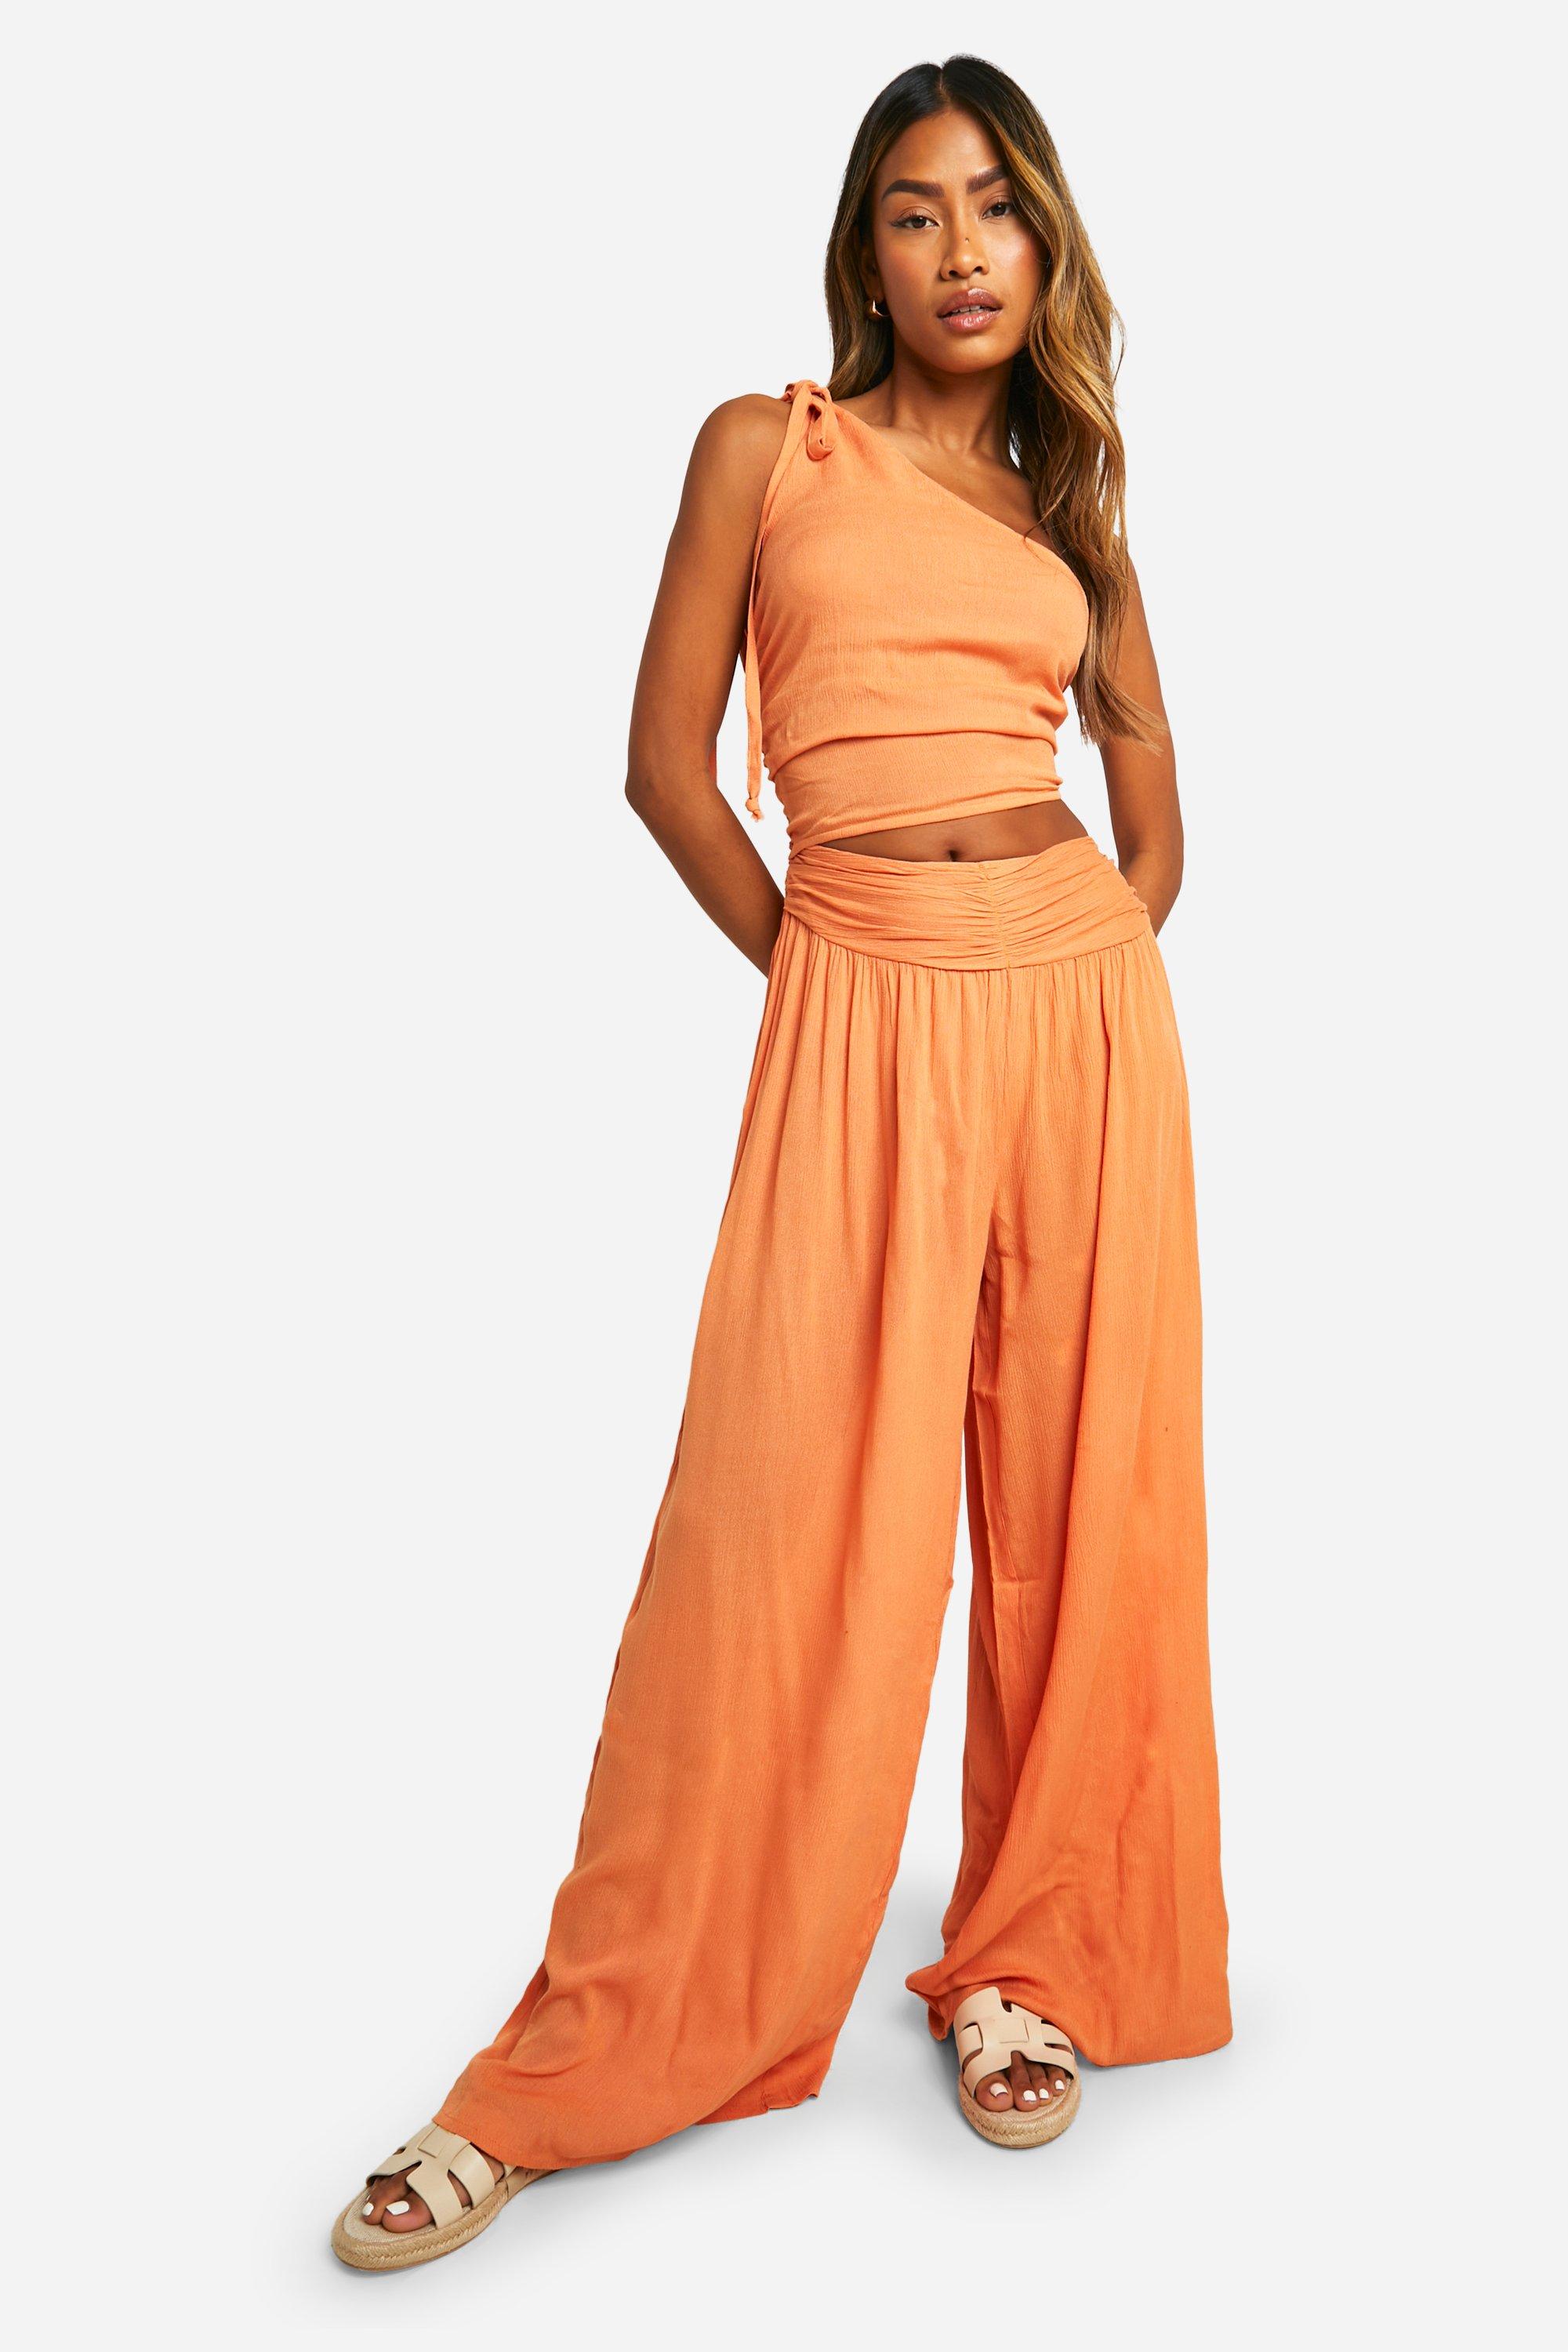 Boohoo Cheesecloth One Shoulder Cut Out Maxi Dress, Terracotta